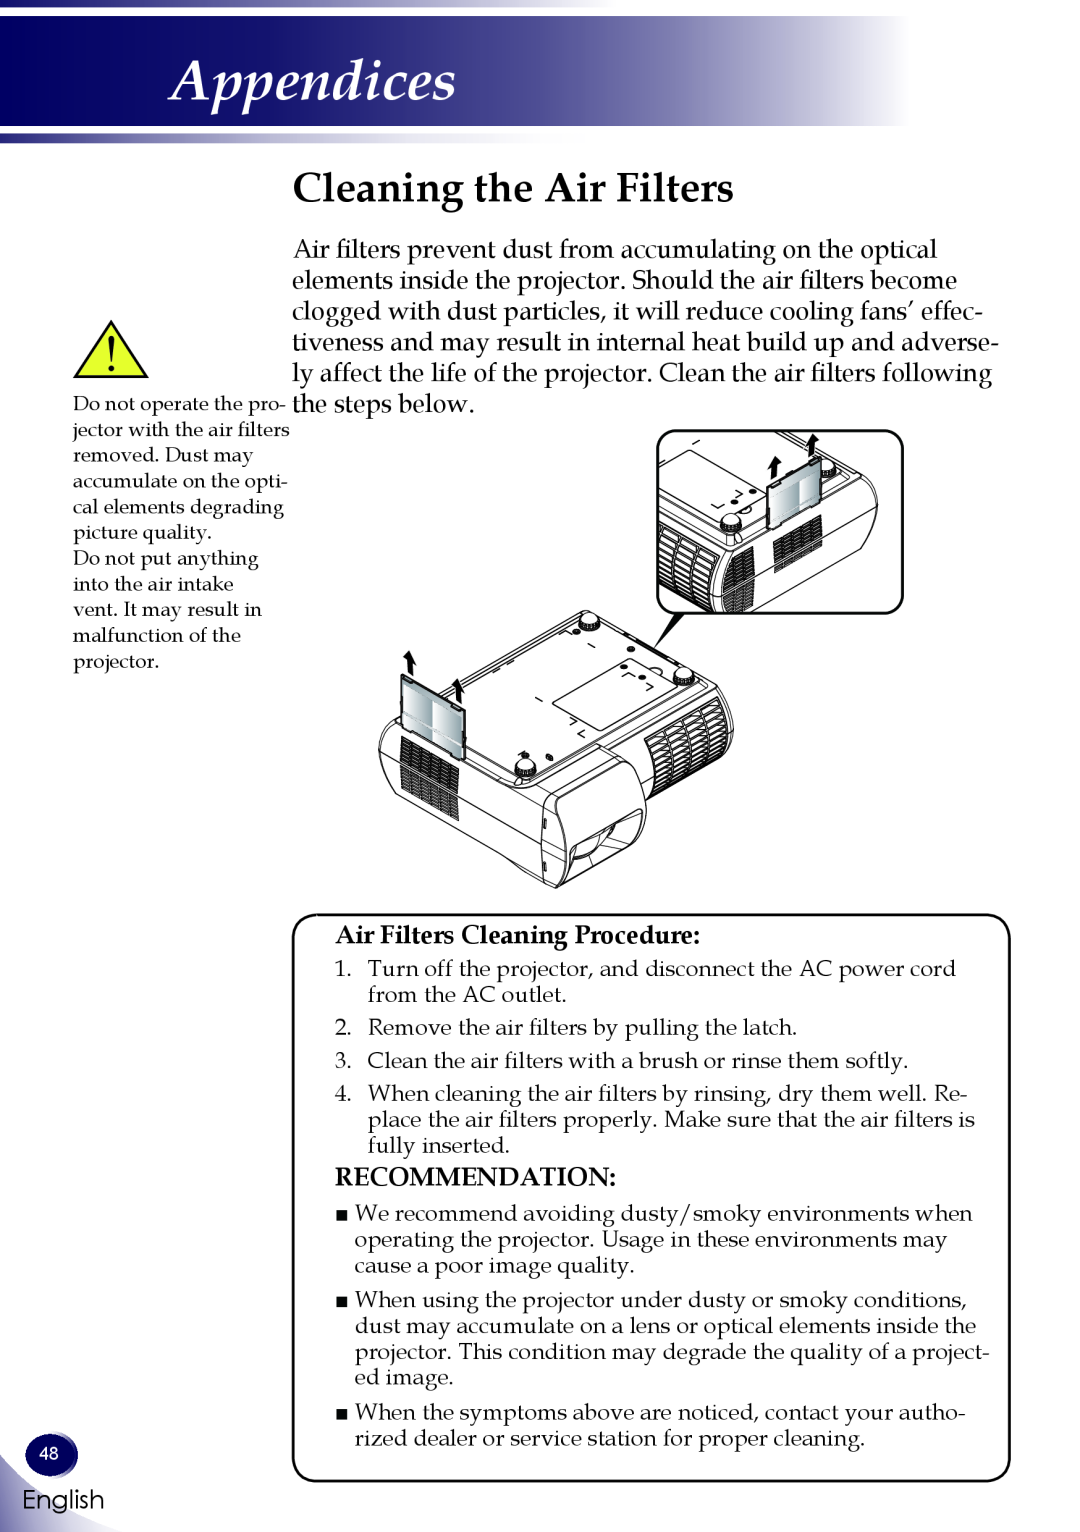 Sanyo PDG-DXL100 owner manual Cleaning the Air Filters, Air Filters Cleaning Procedure, Recommendation, Appendices, English 